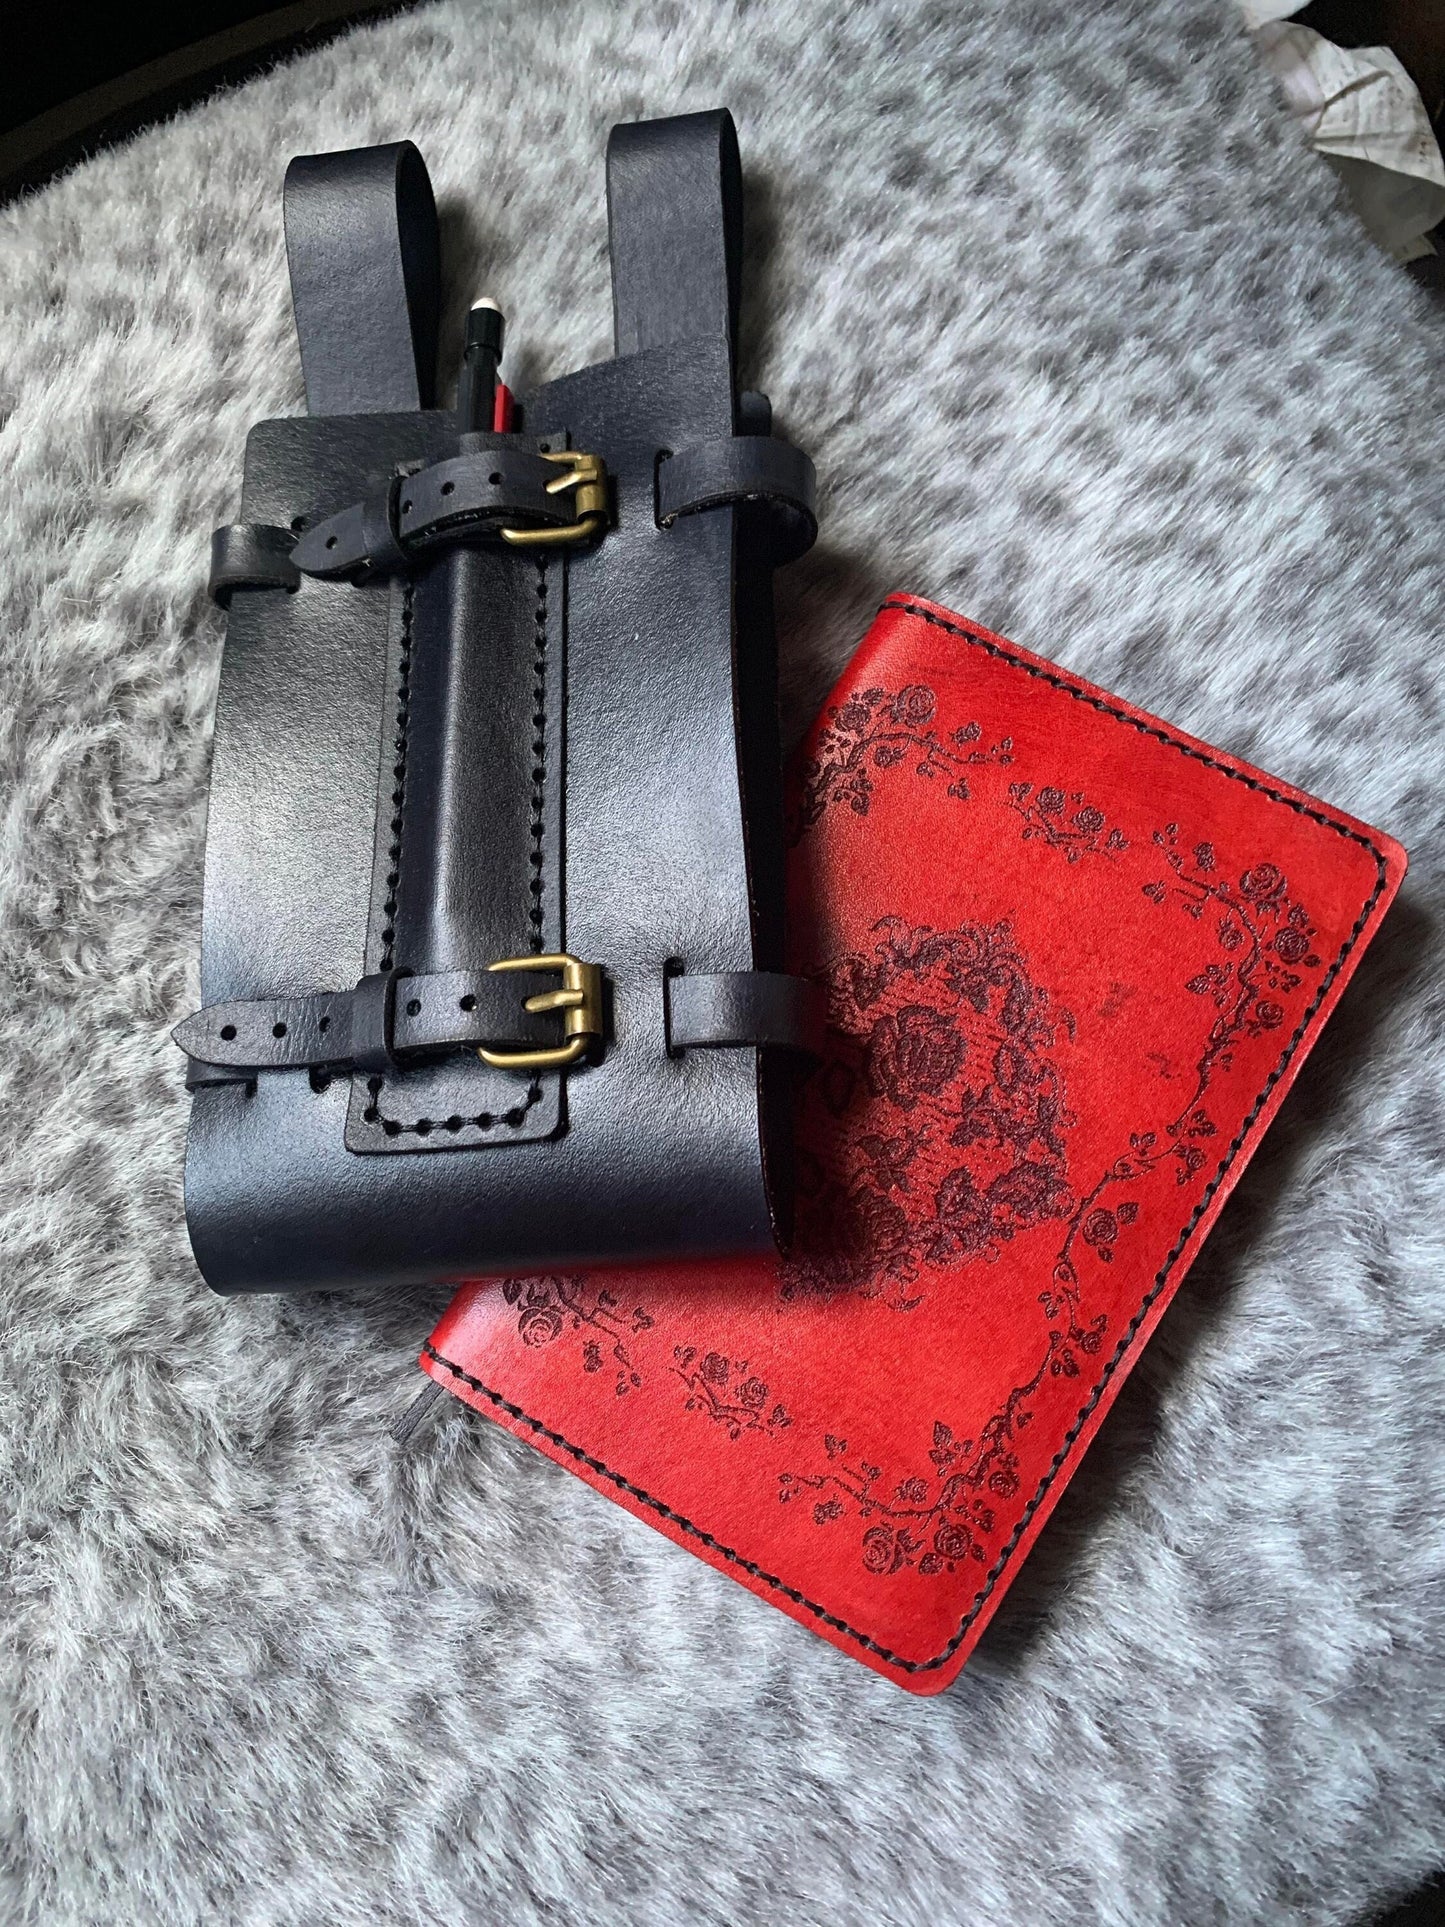 Book Holster and Journal Cover bundle for Ren Faire, LARP, Cosplay